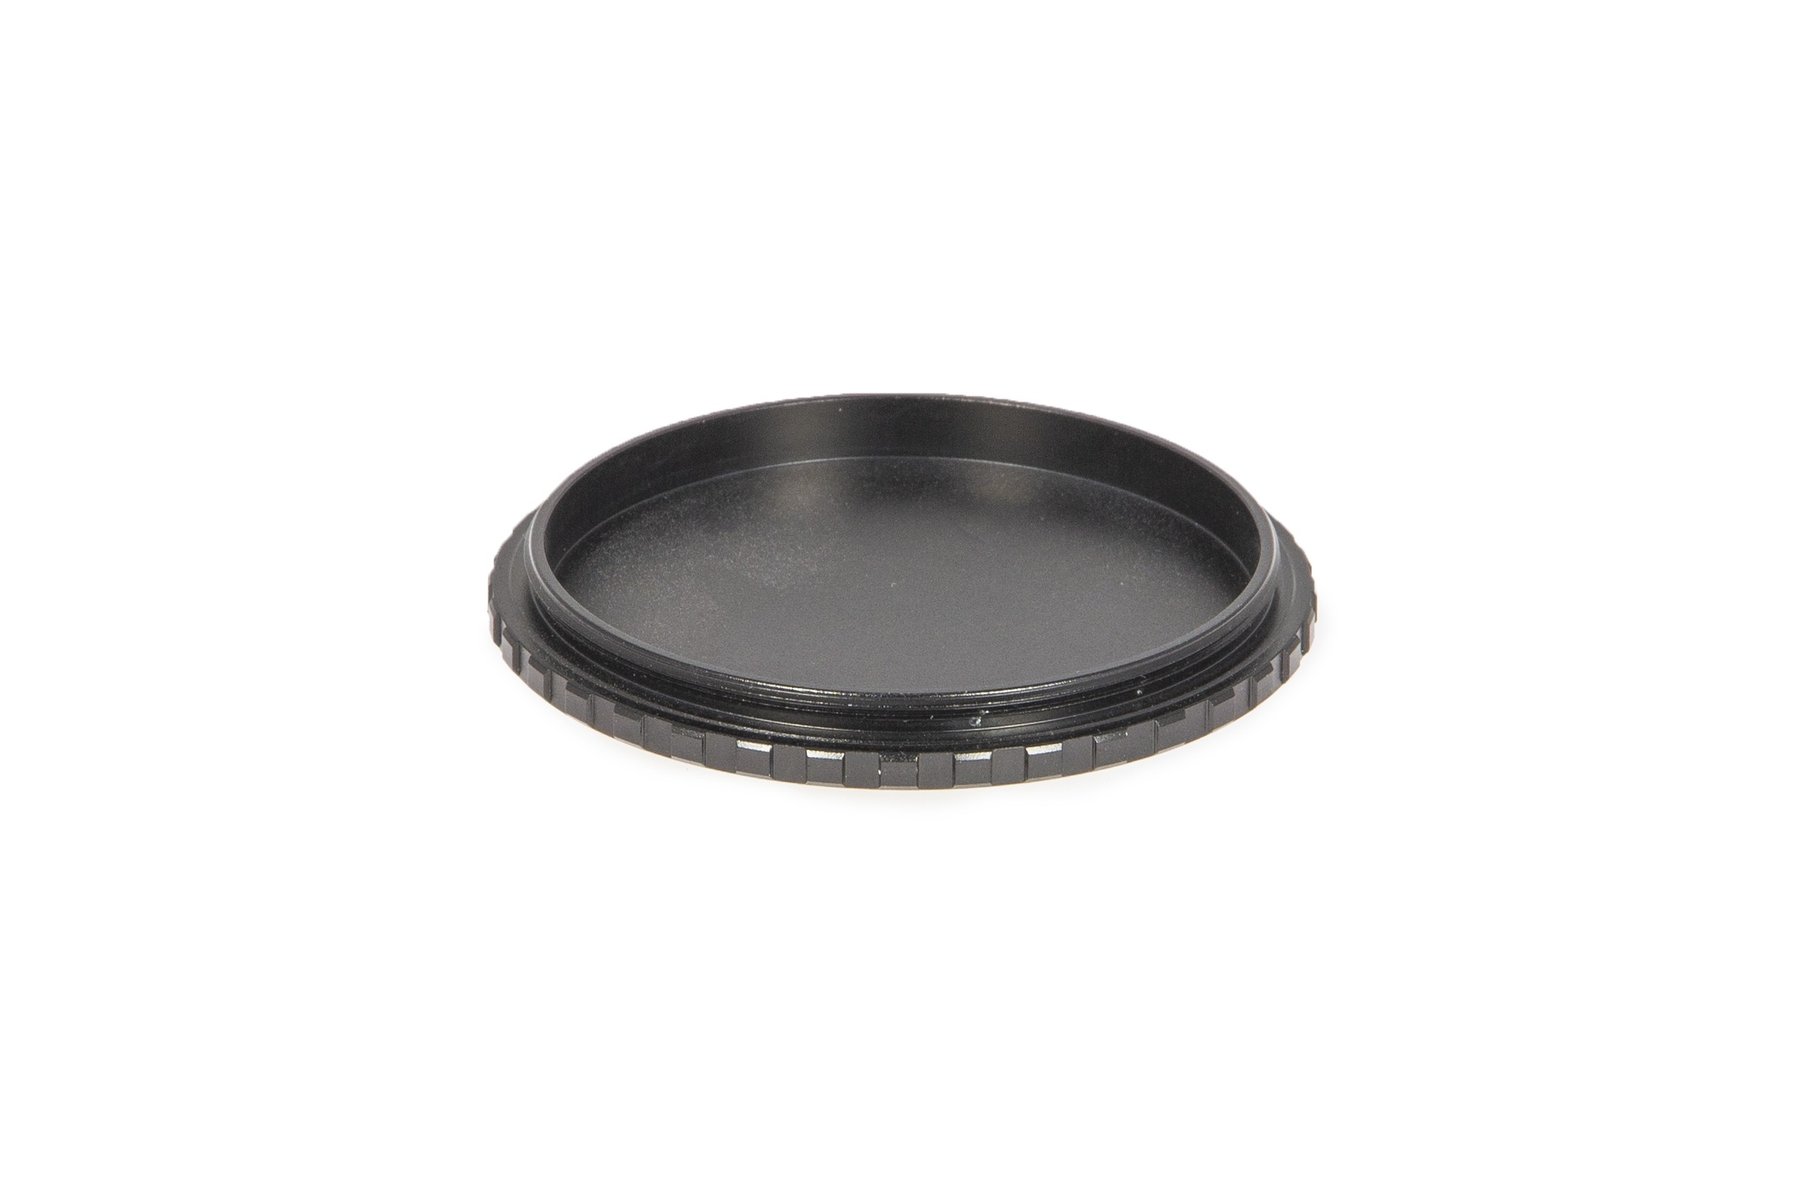 Baader M68 Metal Dustcap with M68 x 1 Male Thread